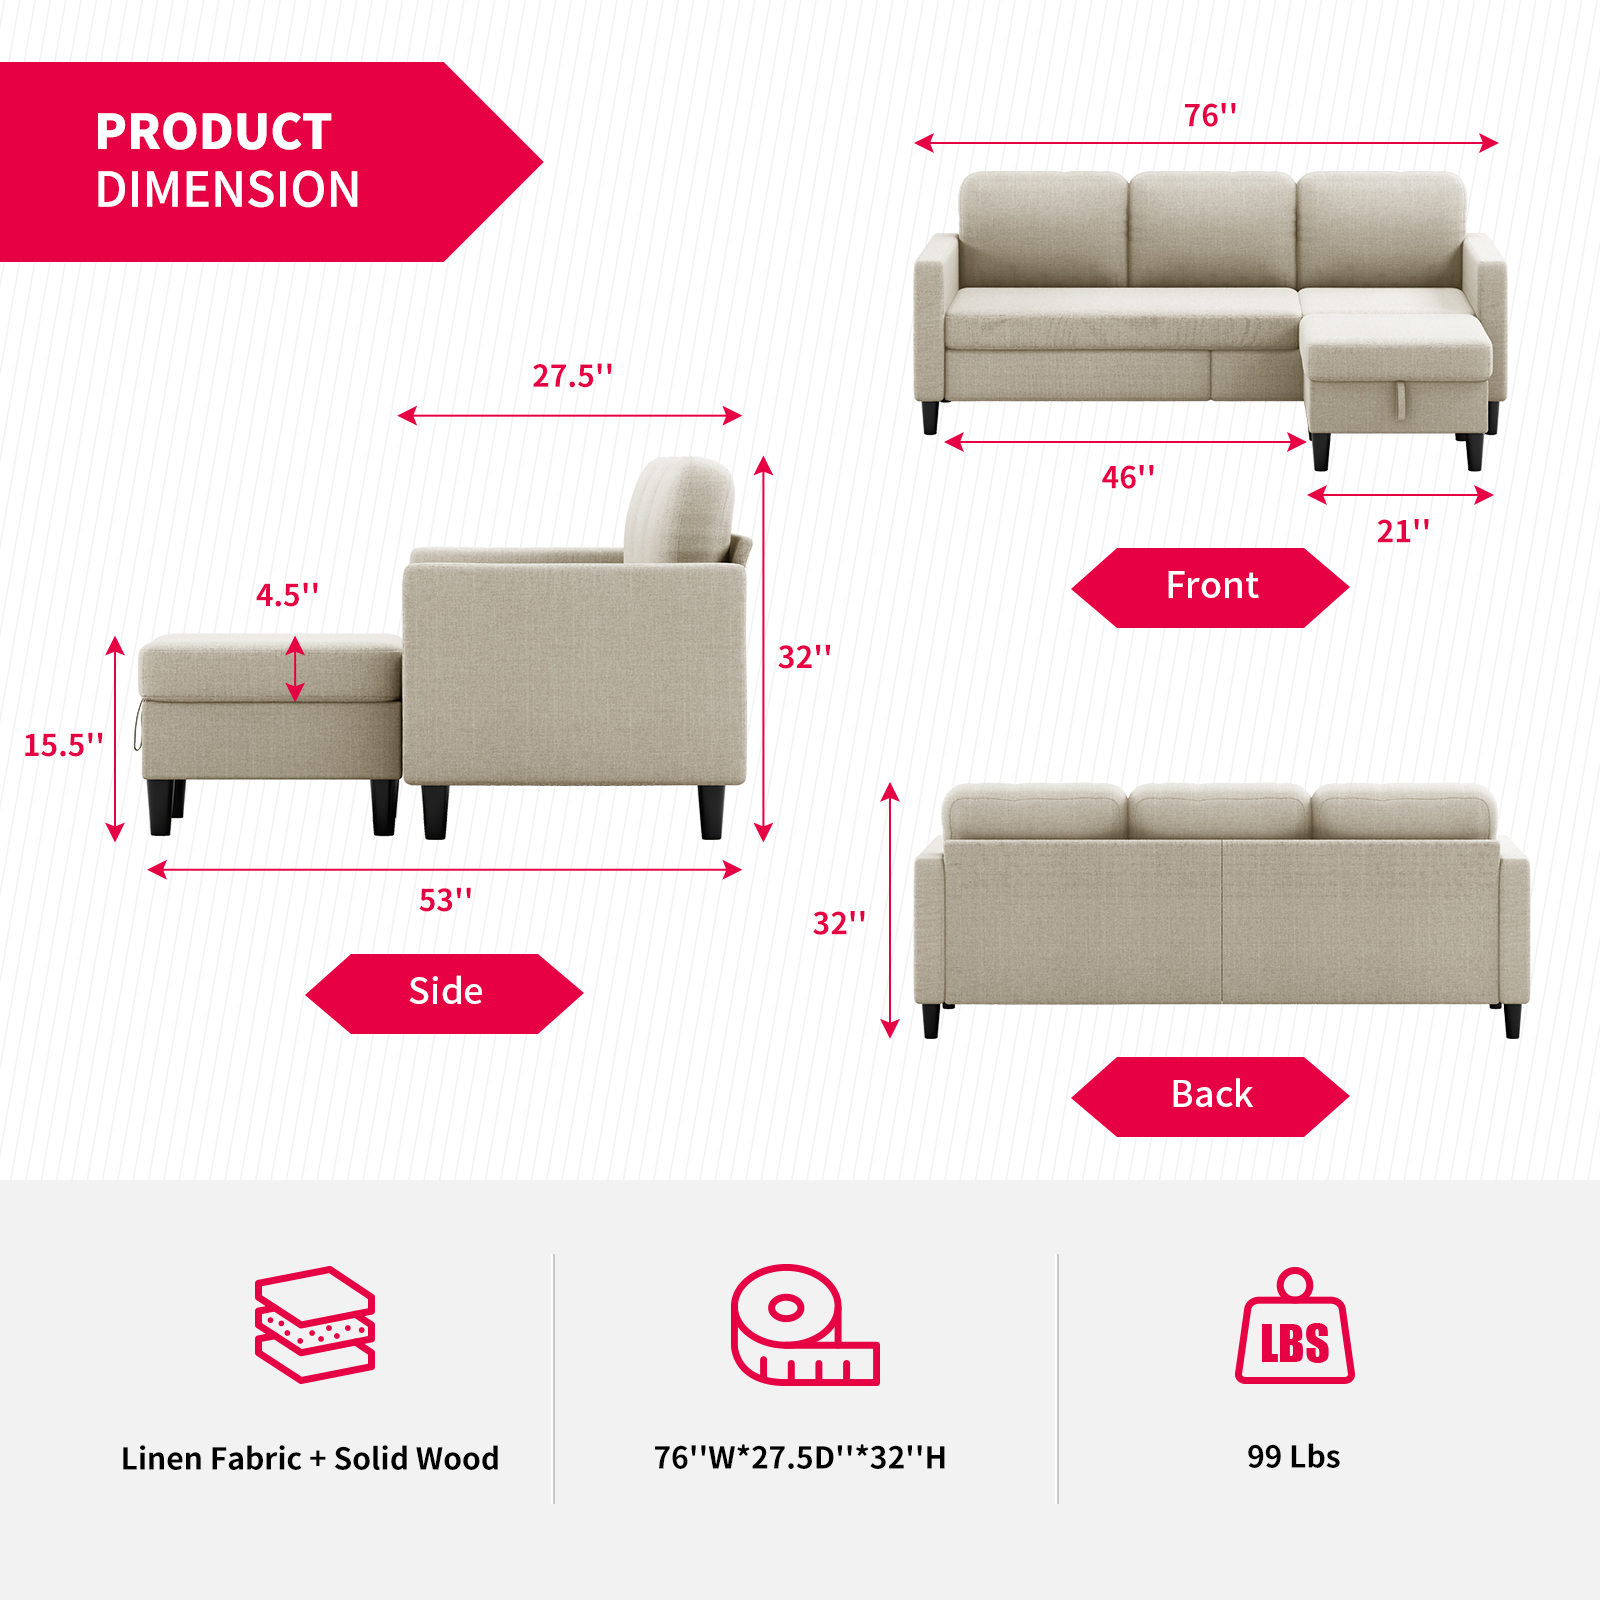 MUZZ Sectional Sofa with Movable Ottoman, Free Combination Sectional Couch, Small L Shaped Sectional Sofa with Storage Ottoman,Linen Fabric Wood Frame Sofa Set for Living Room (Beige) - image 3 of 6